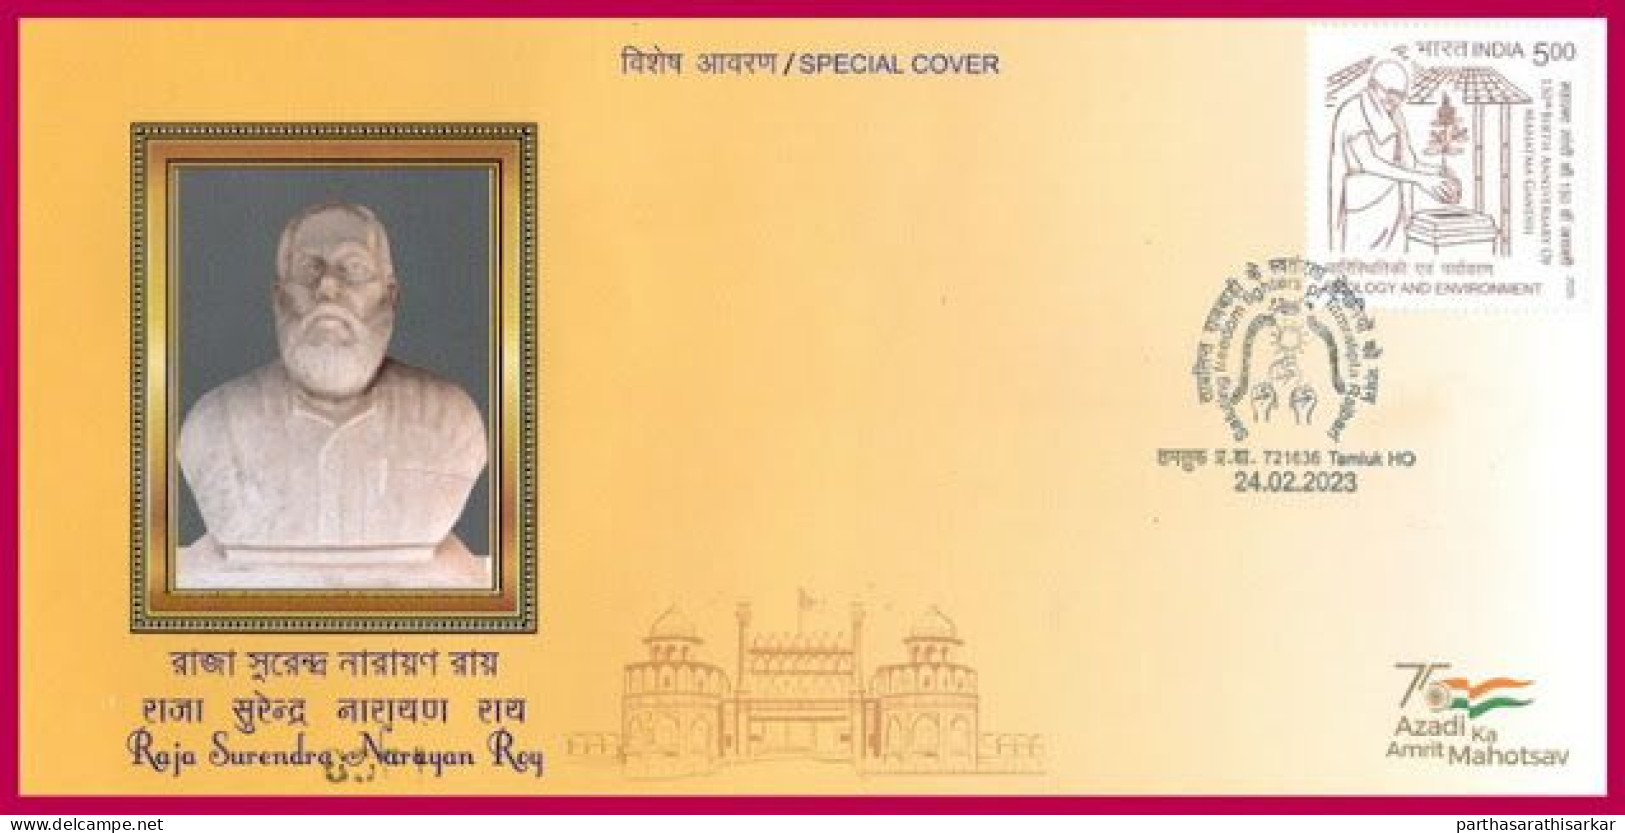 INDIA 2023 RAJA SURENDRA NARAYAN ROY FREEDOM FIGHTER SPECIAL COVER ISSUED BY INDIA POST USED RARE - Storia Postale